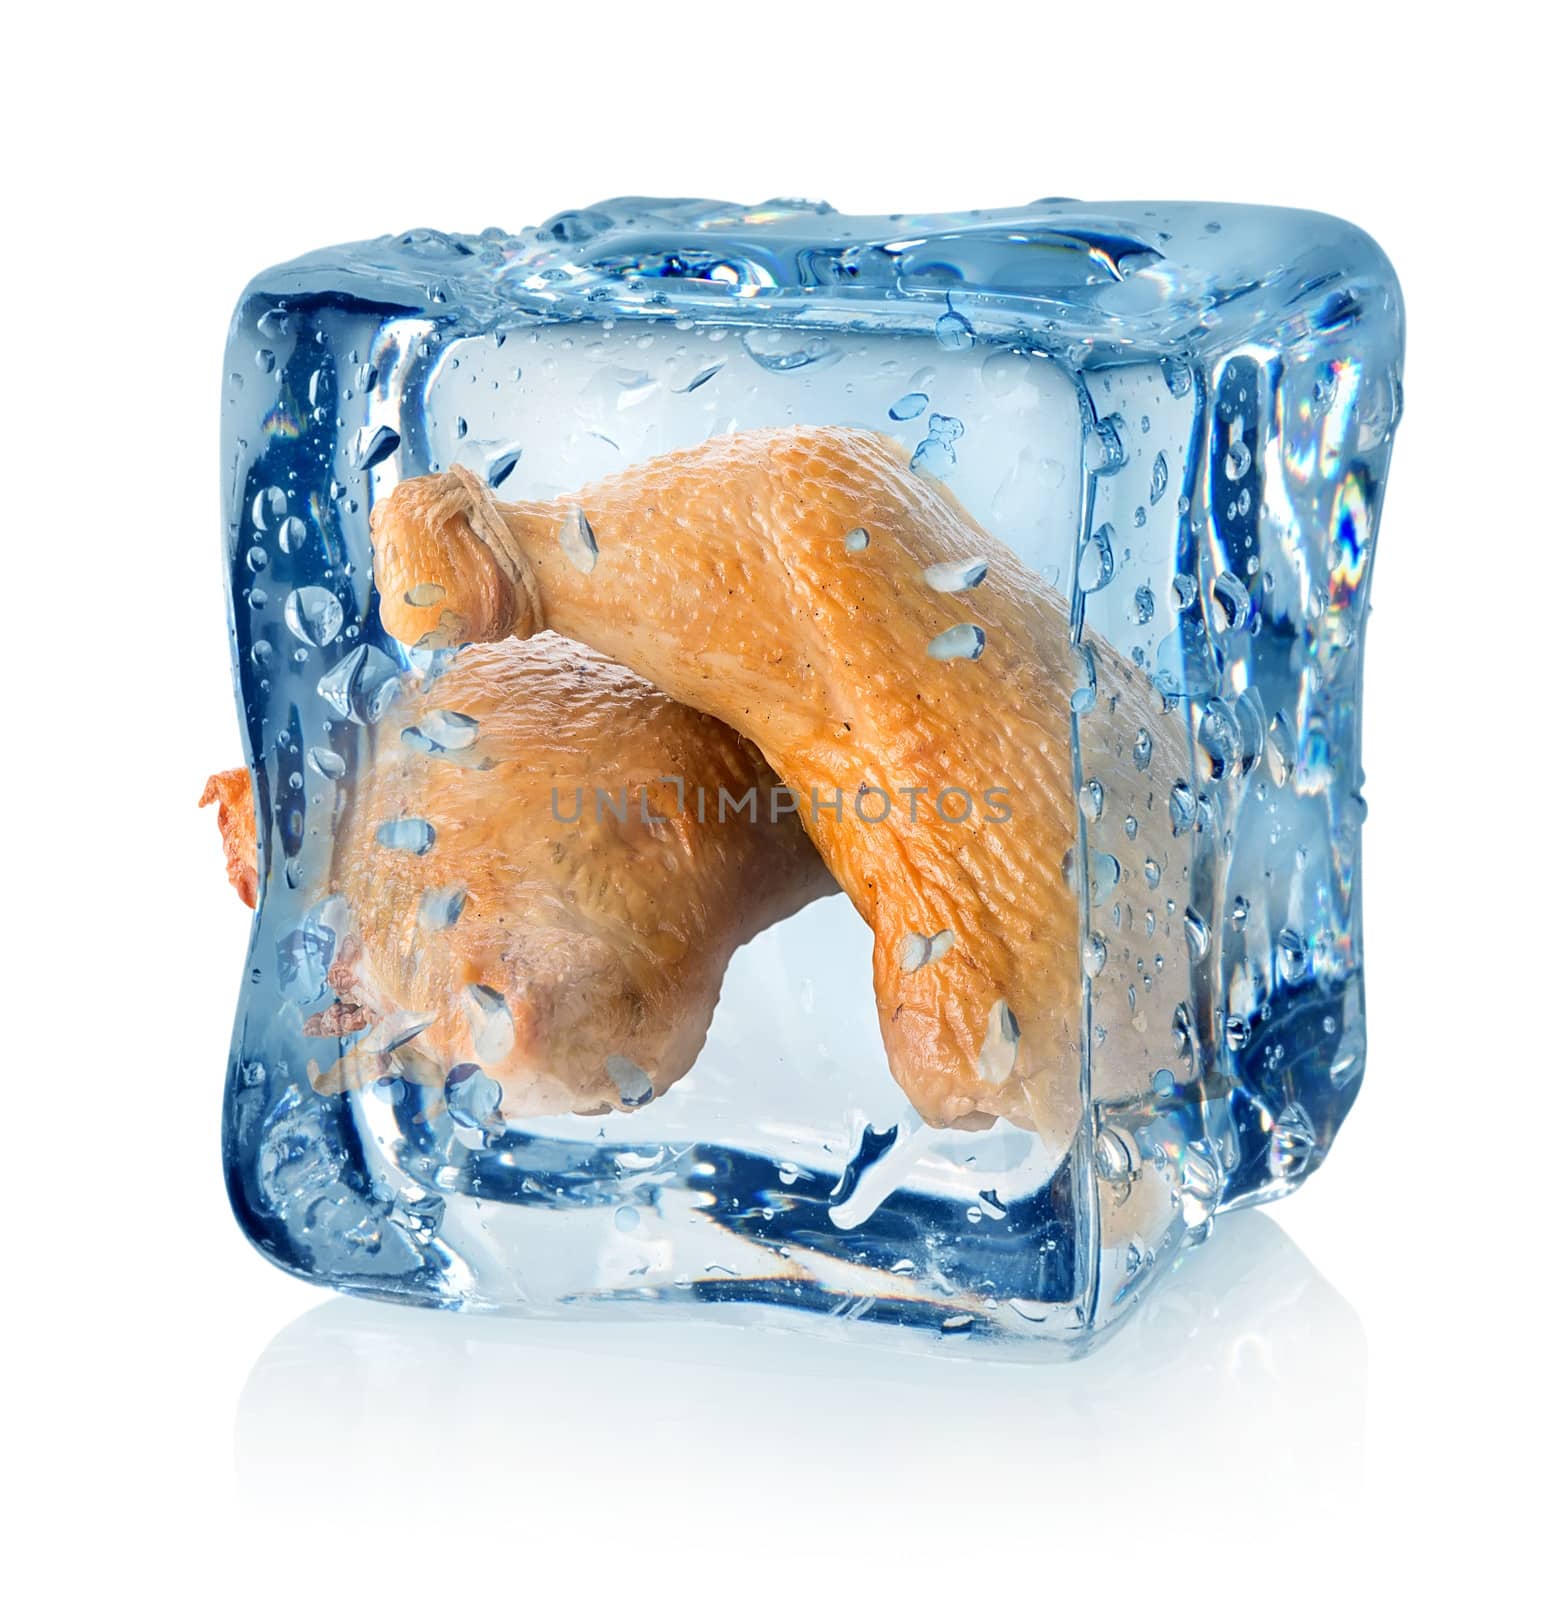 Smoked chicken legs in ice cube isolated on a white background